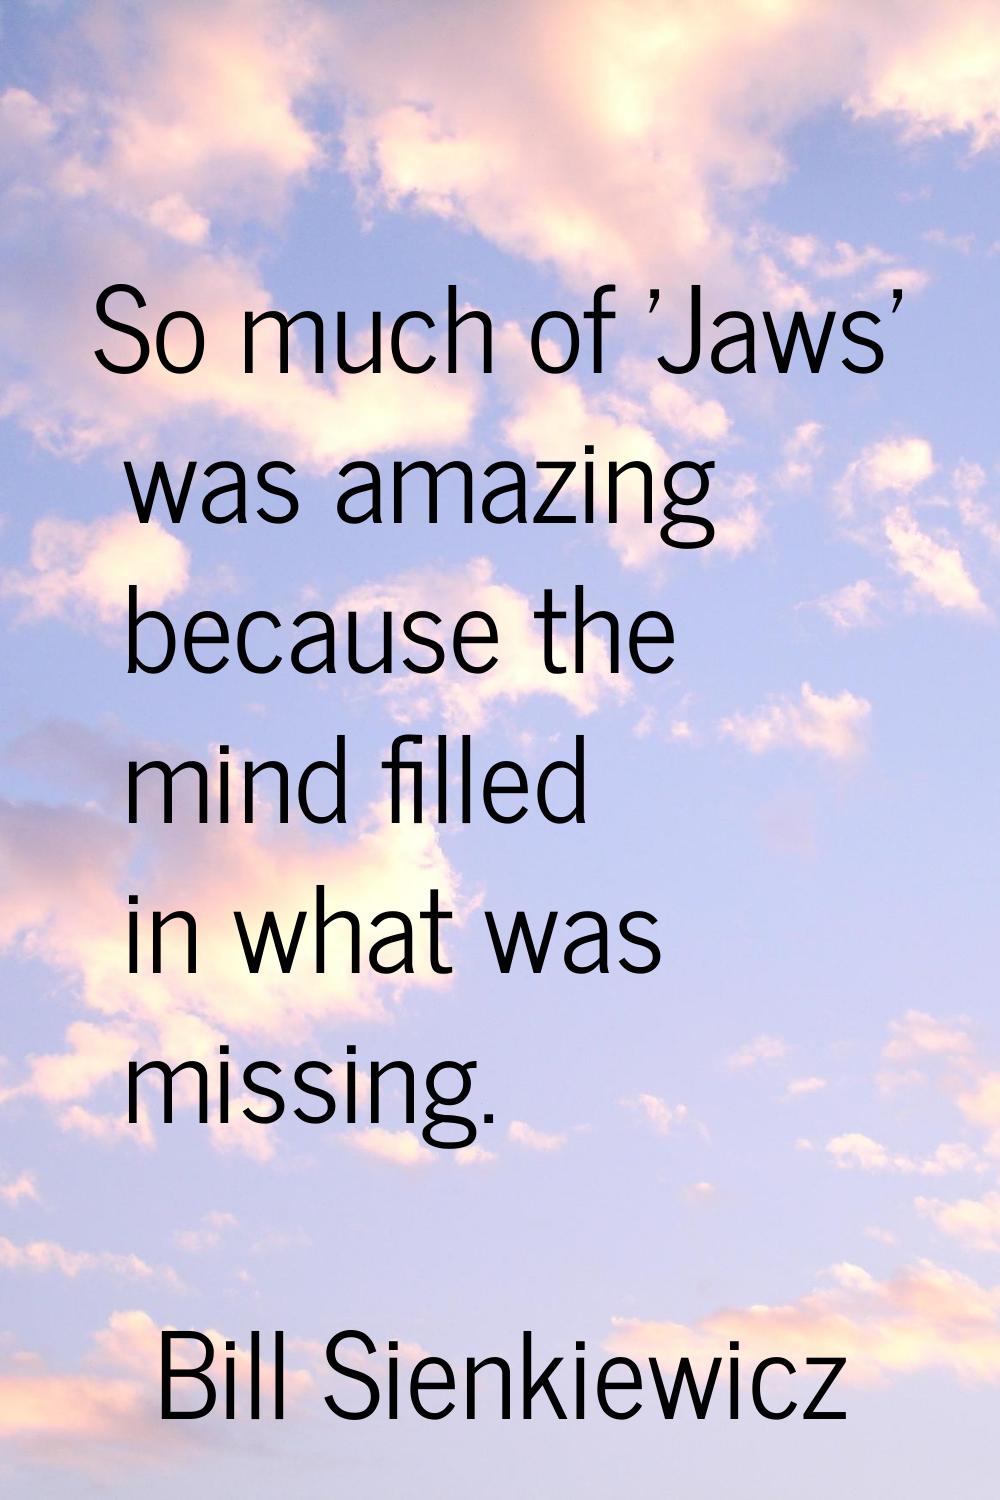 So much of 'Jaws' was amazing because the mind filled in what was missing.